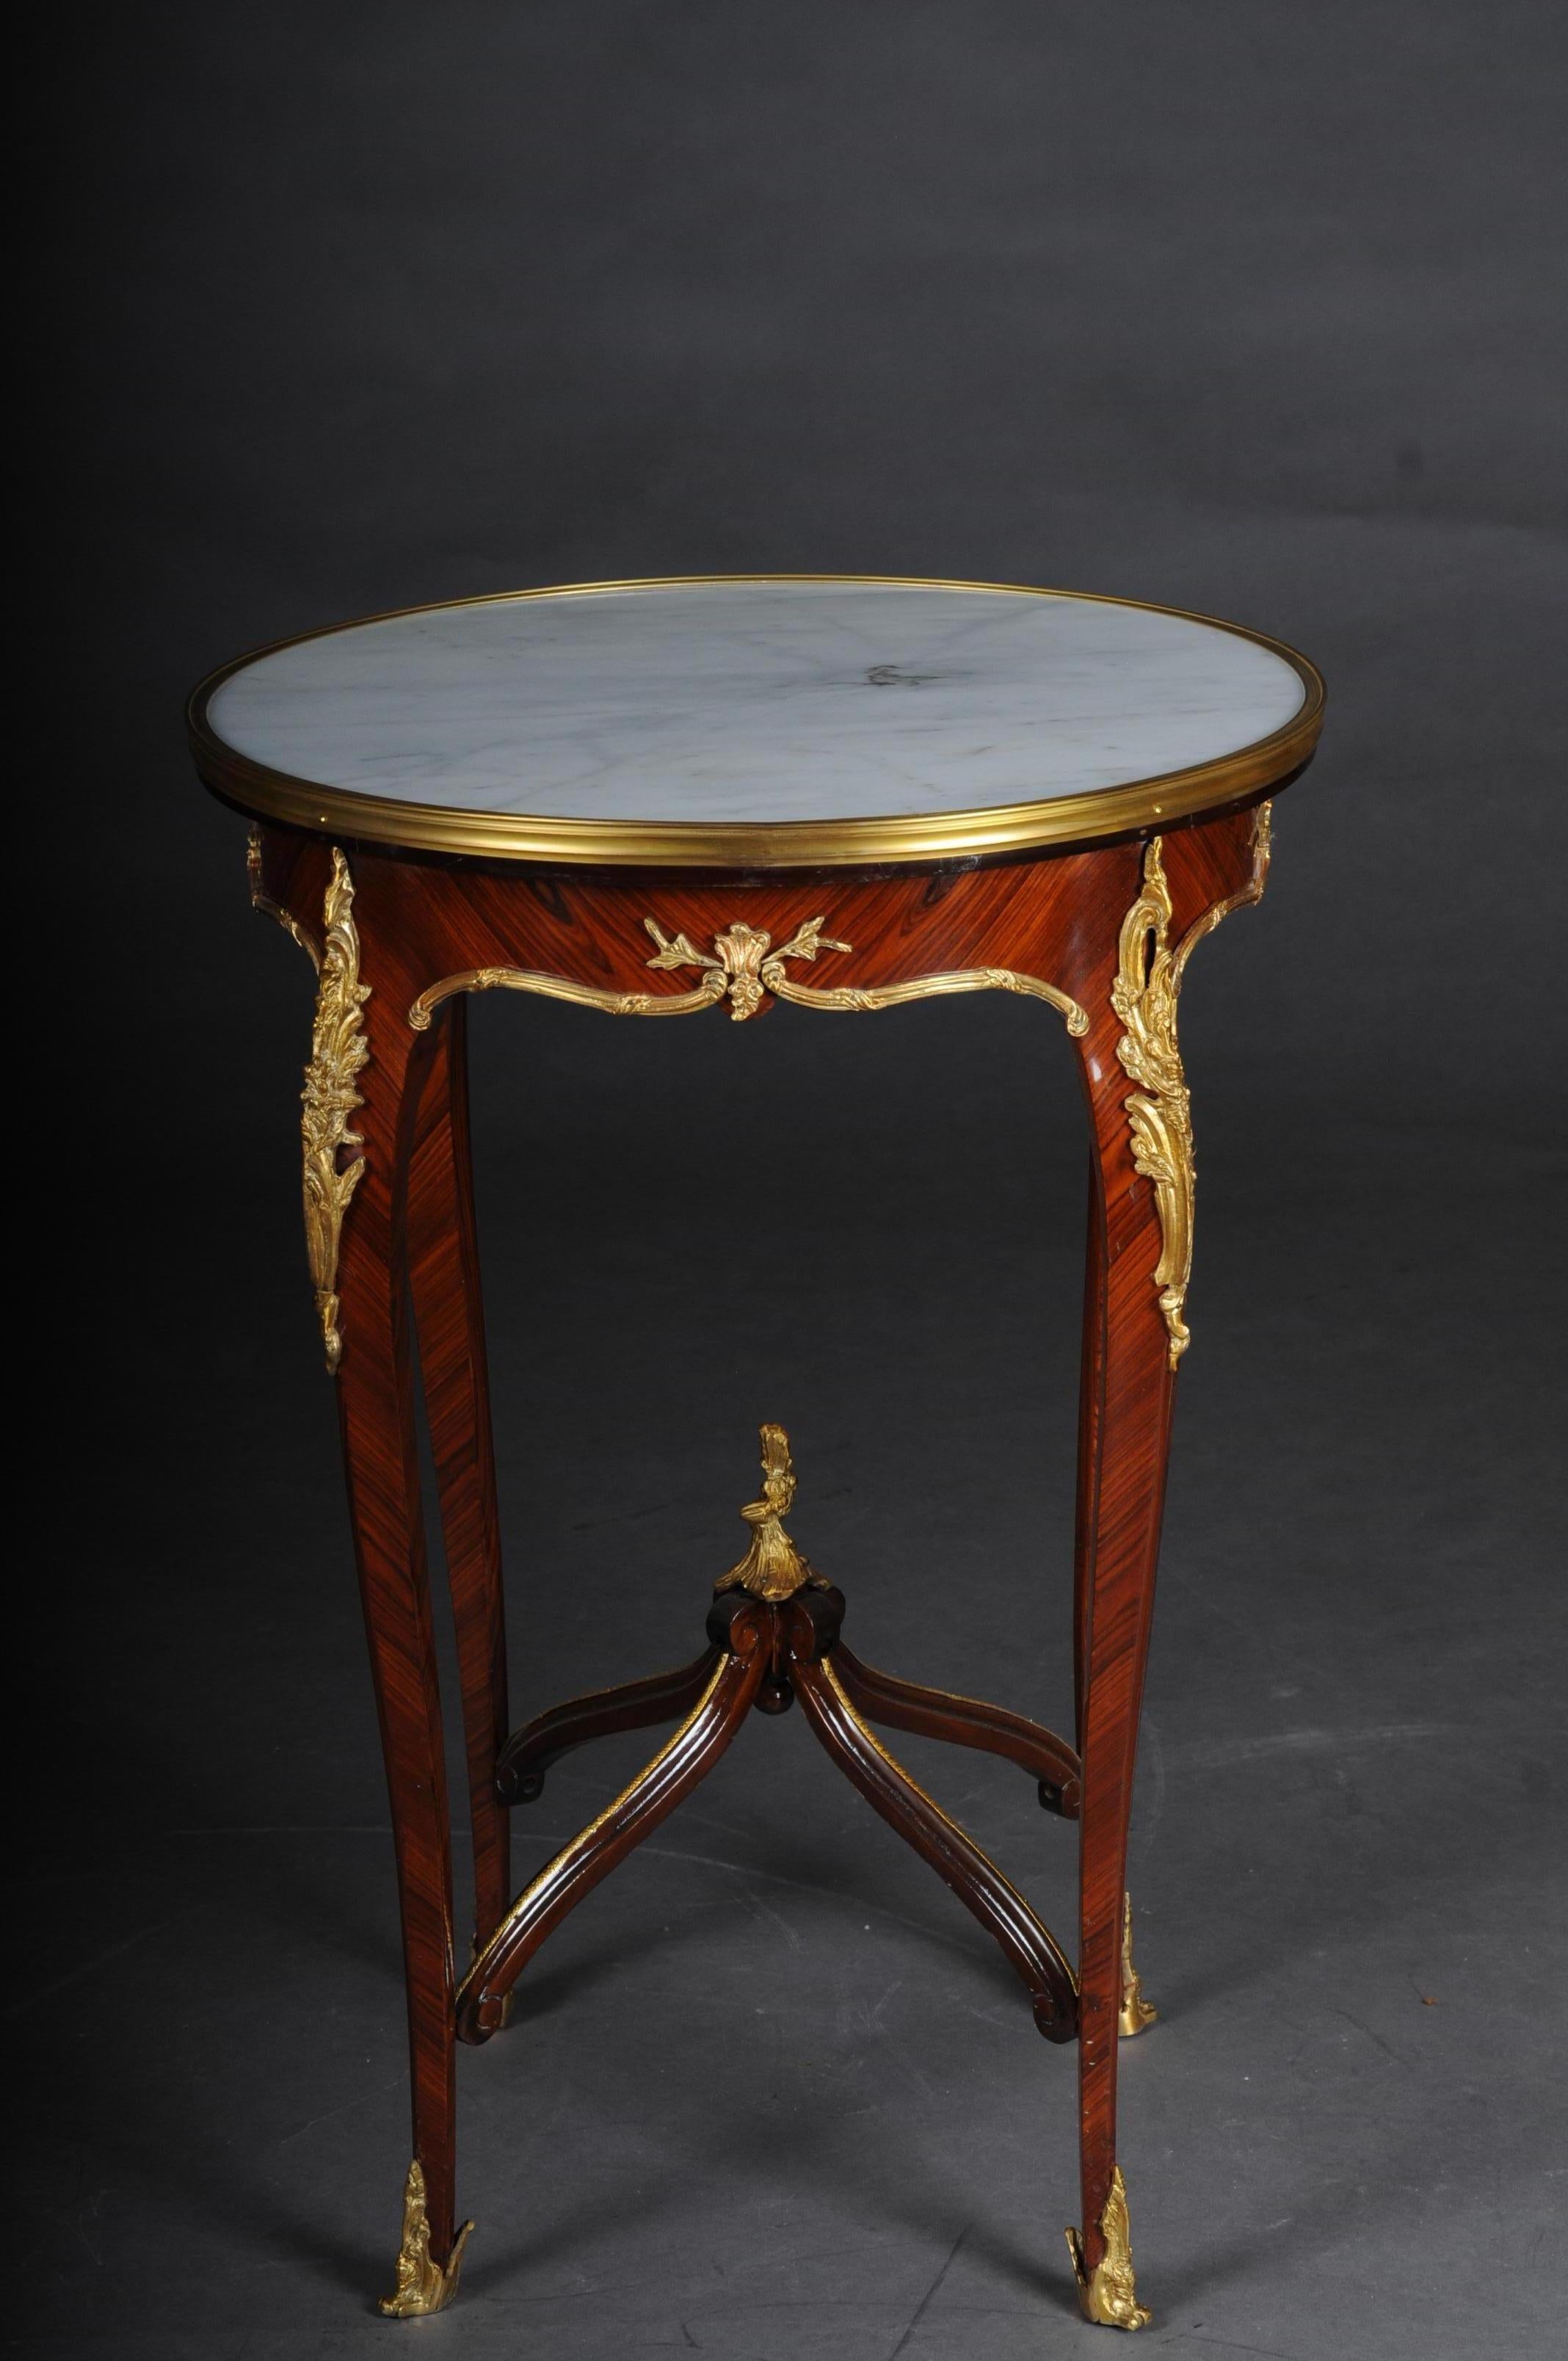 Classic saloon side table in the Louis XV after F. Linke.

Veneer on solid beech, daintily finished, body, flanked by solid corner strips on high, elegantly curved legs with bronze fittings ending in sabots. Slightly protruding, round marble top